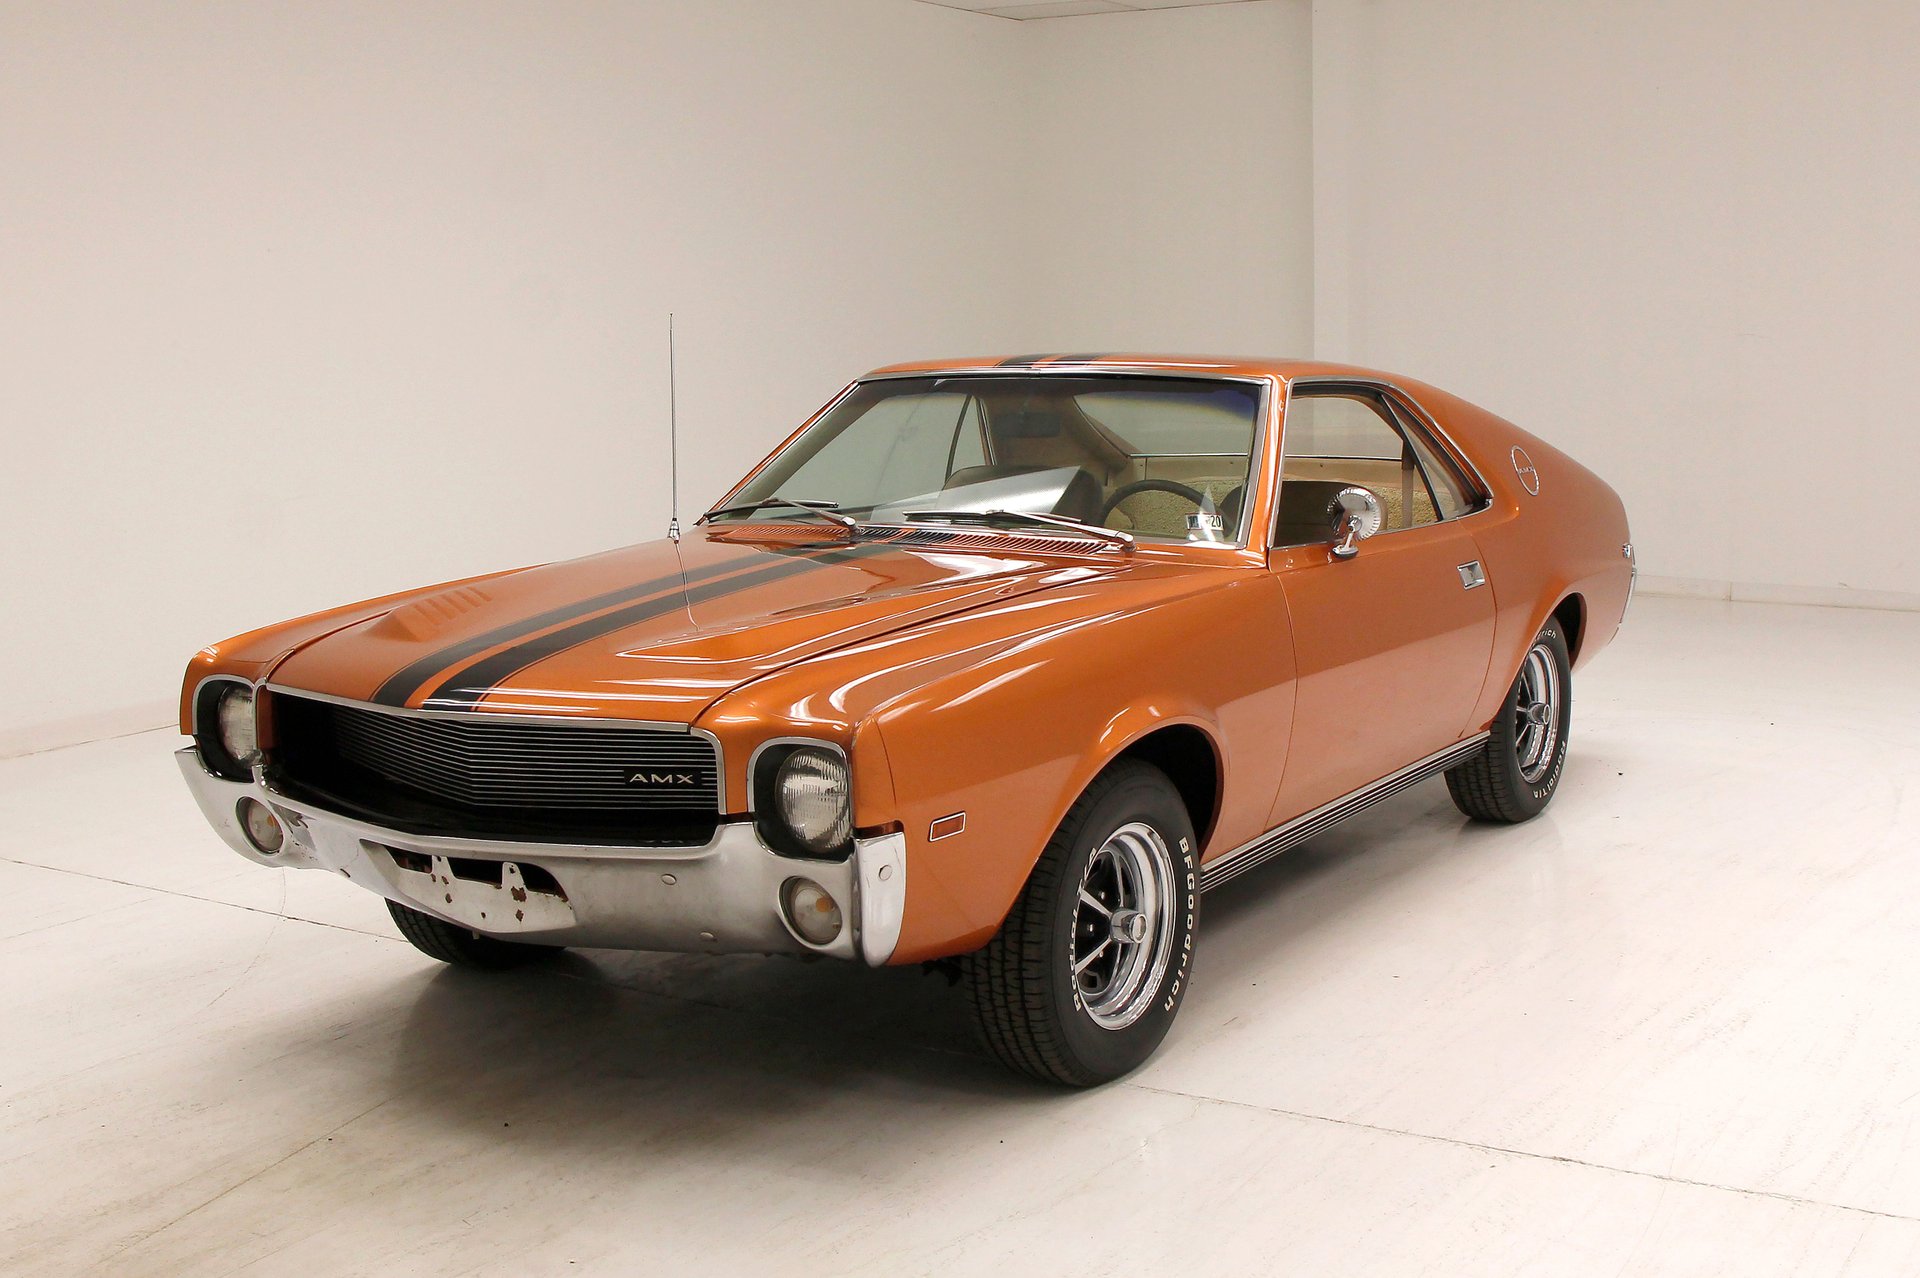 AMC Javelin Looks Bad To The Bone With Shorter Nose And 